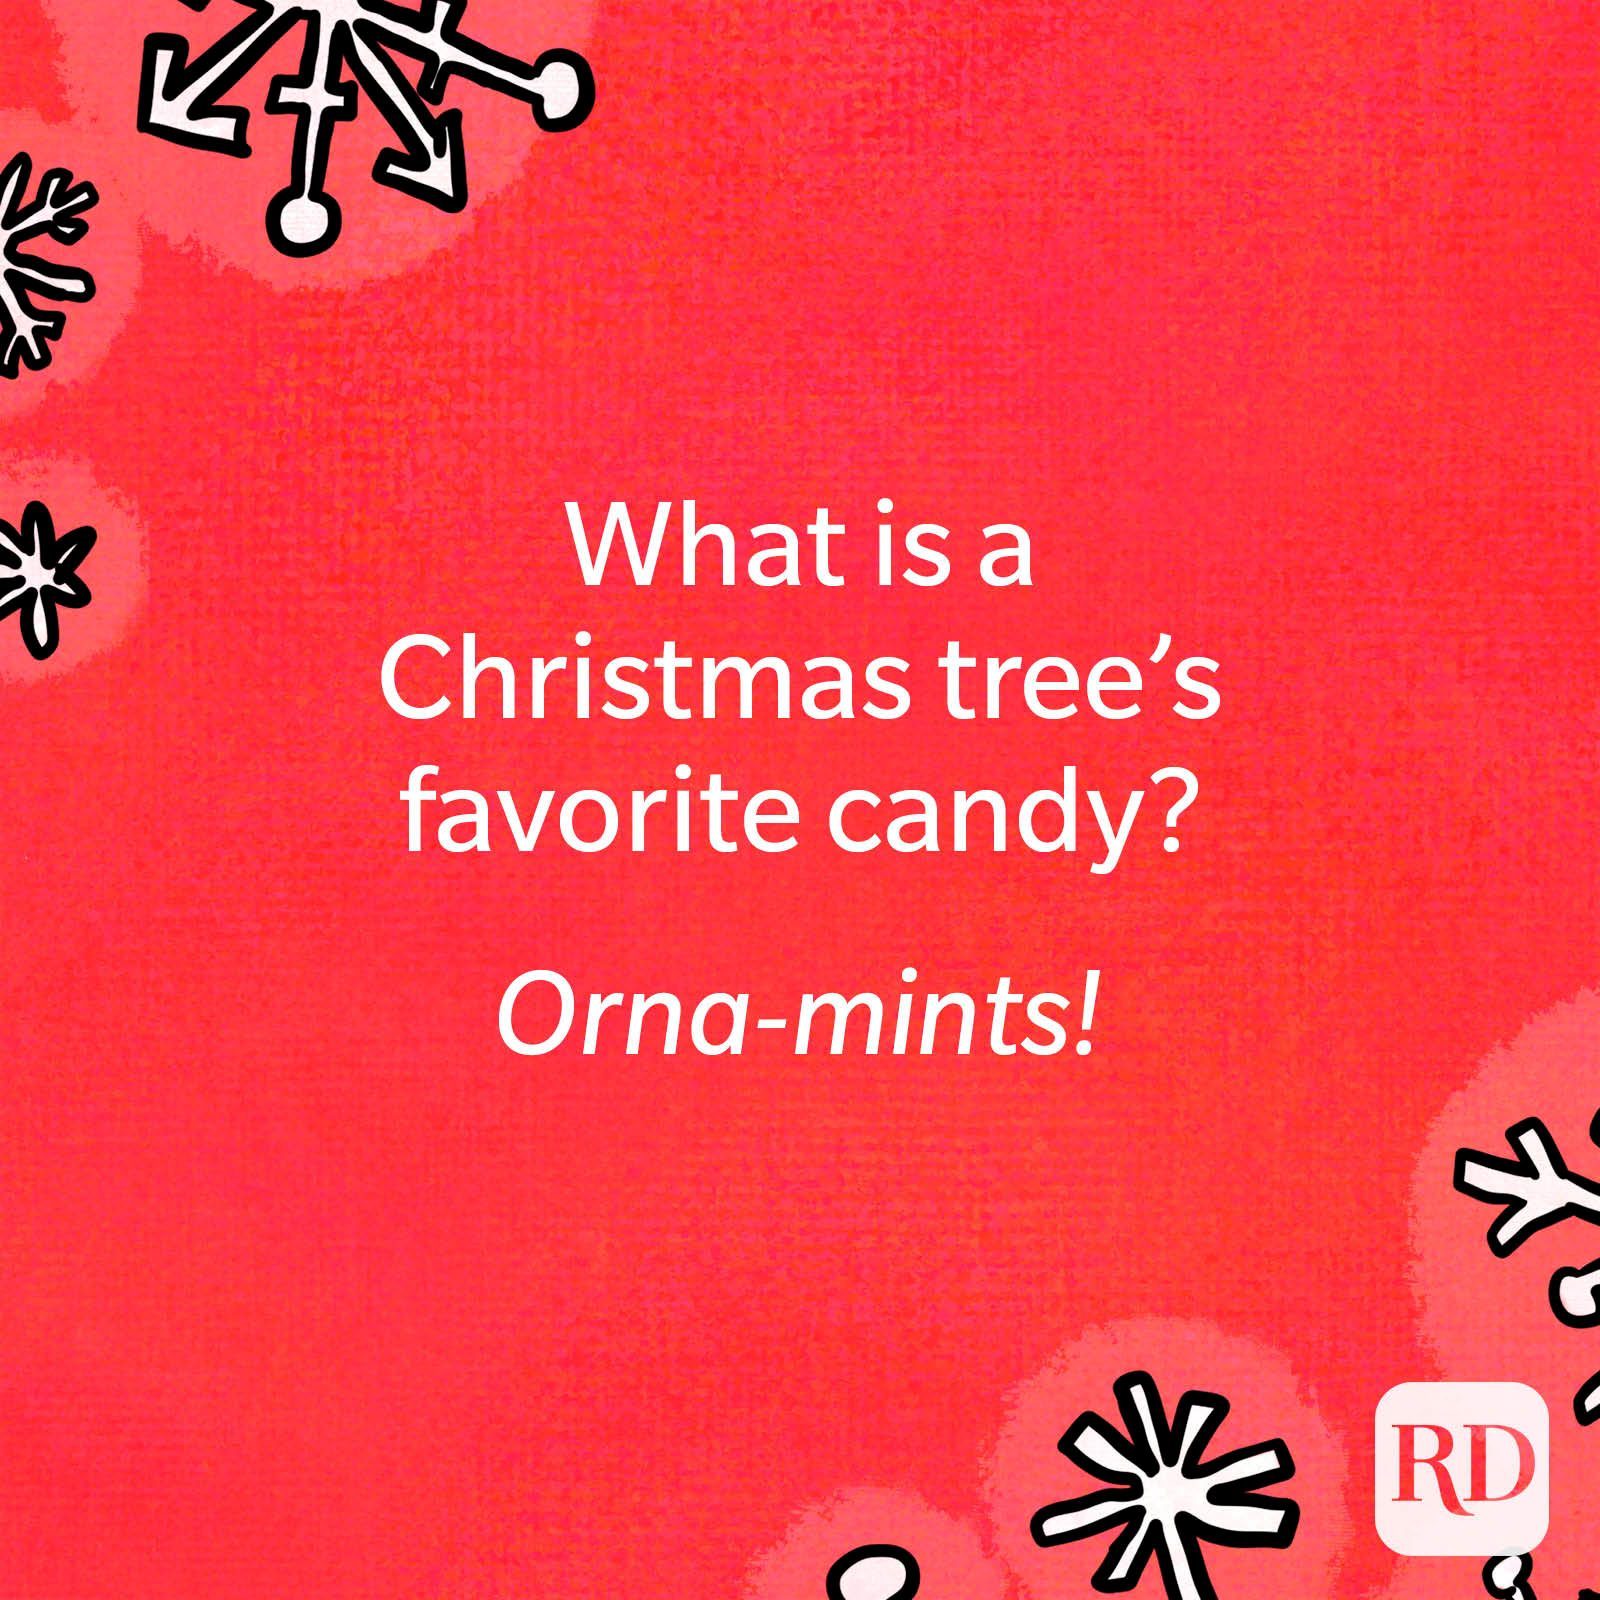 What is a Christmas tree's favorite candy?